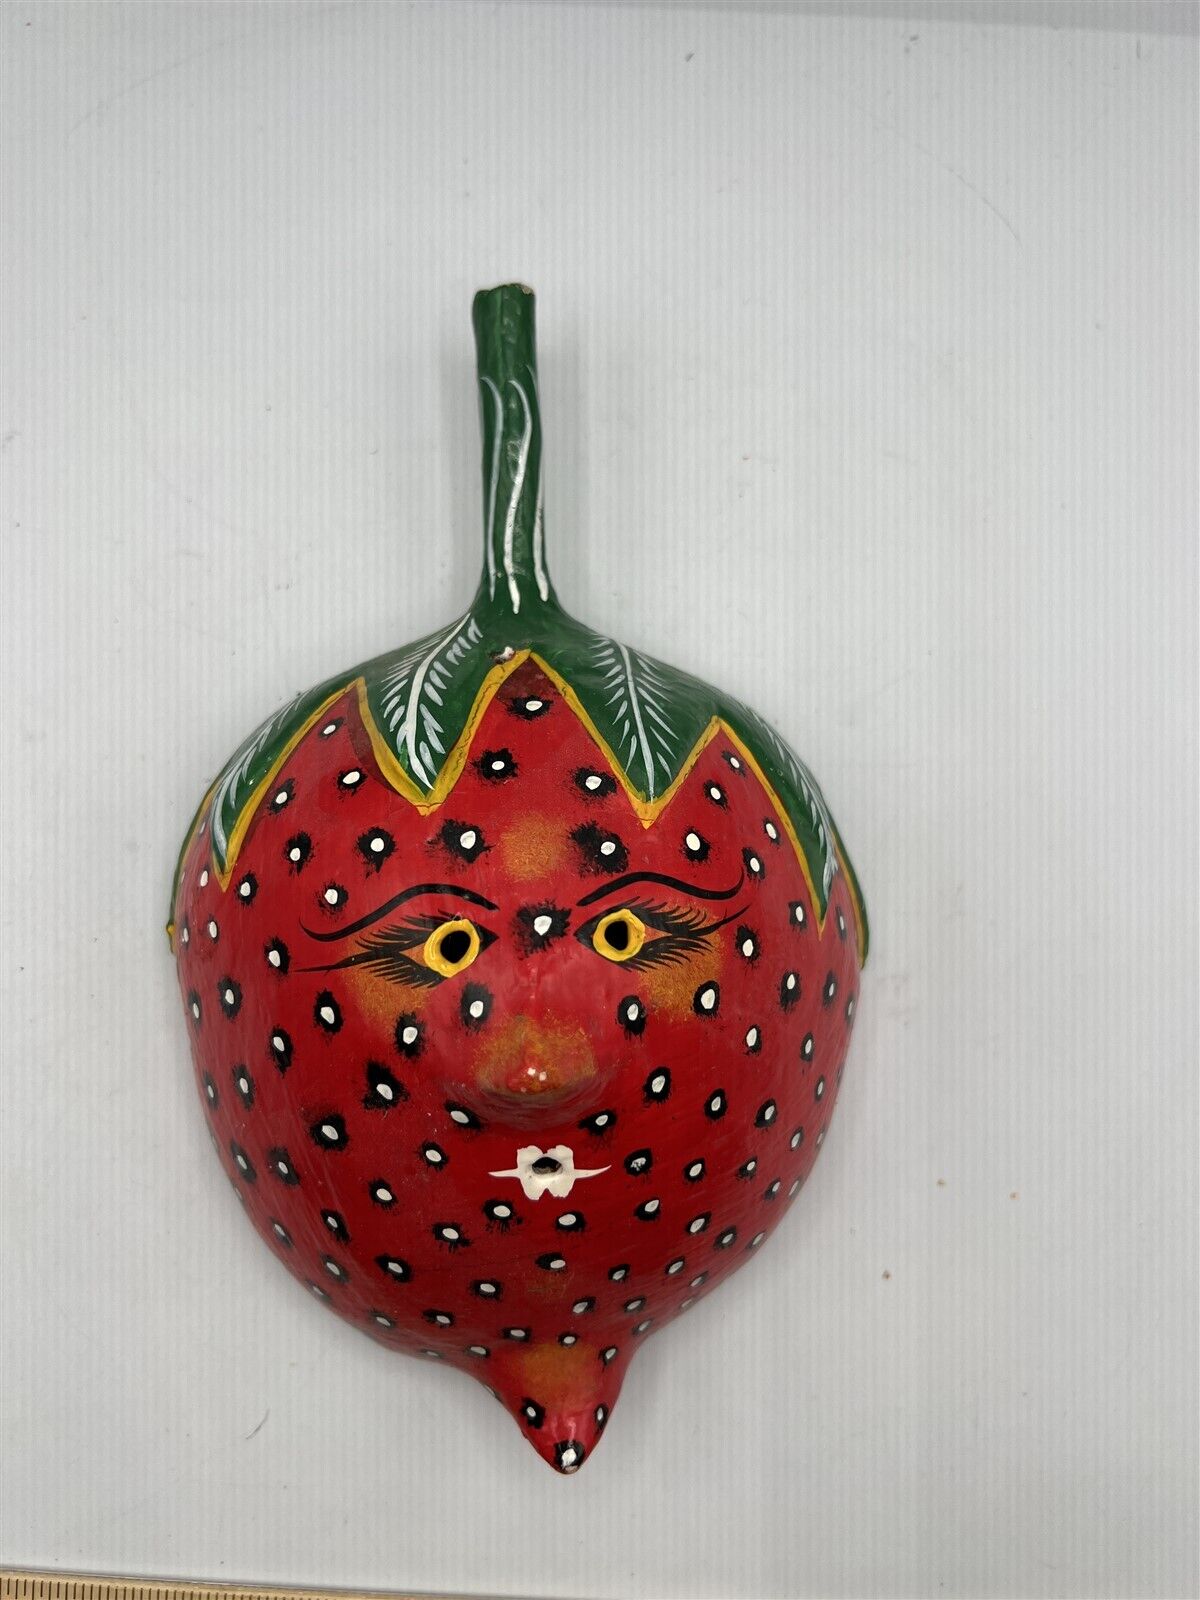 VINTAGE MEXICAN FOLK ART STRAWBERRY MAN WITH FACE HAND PAINTED COCONUT SHELL